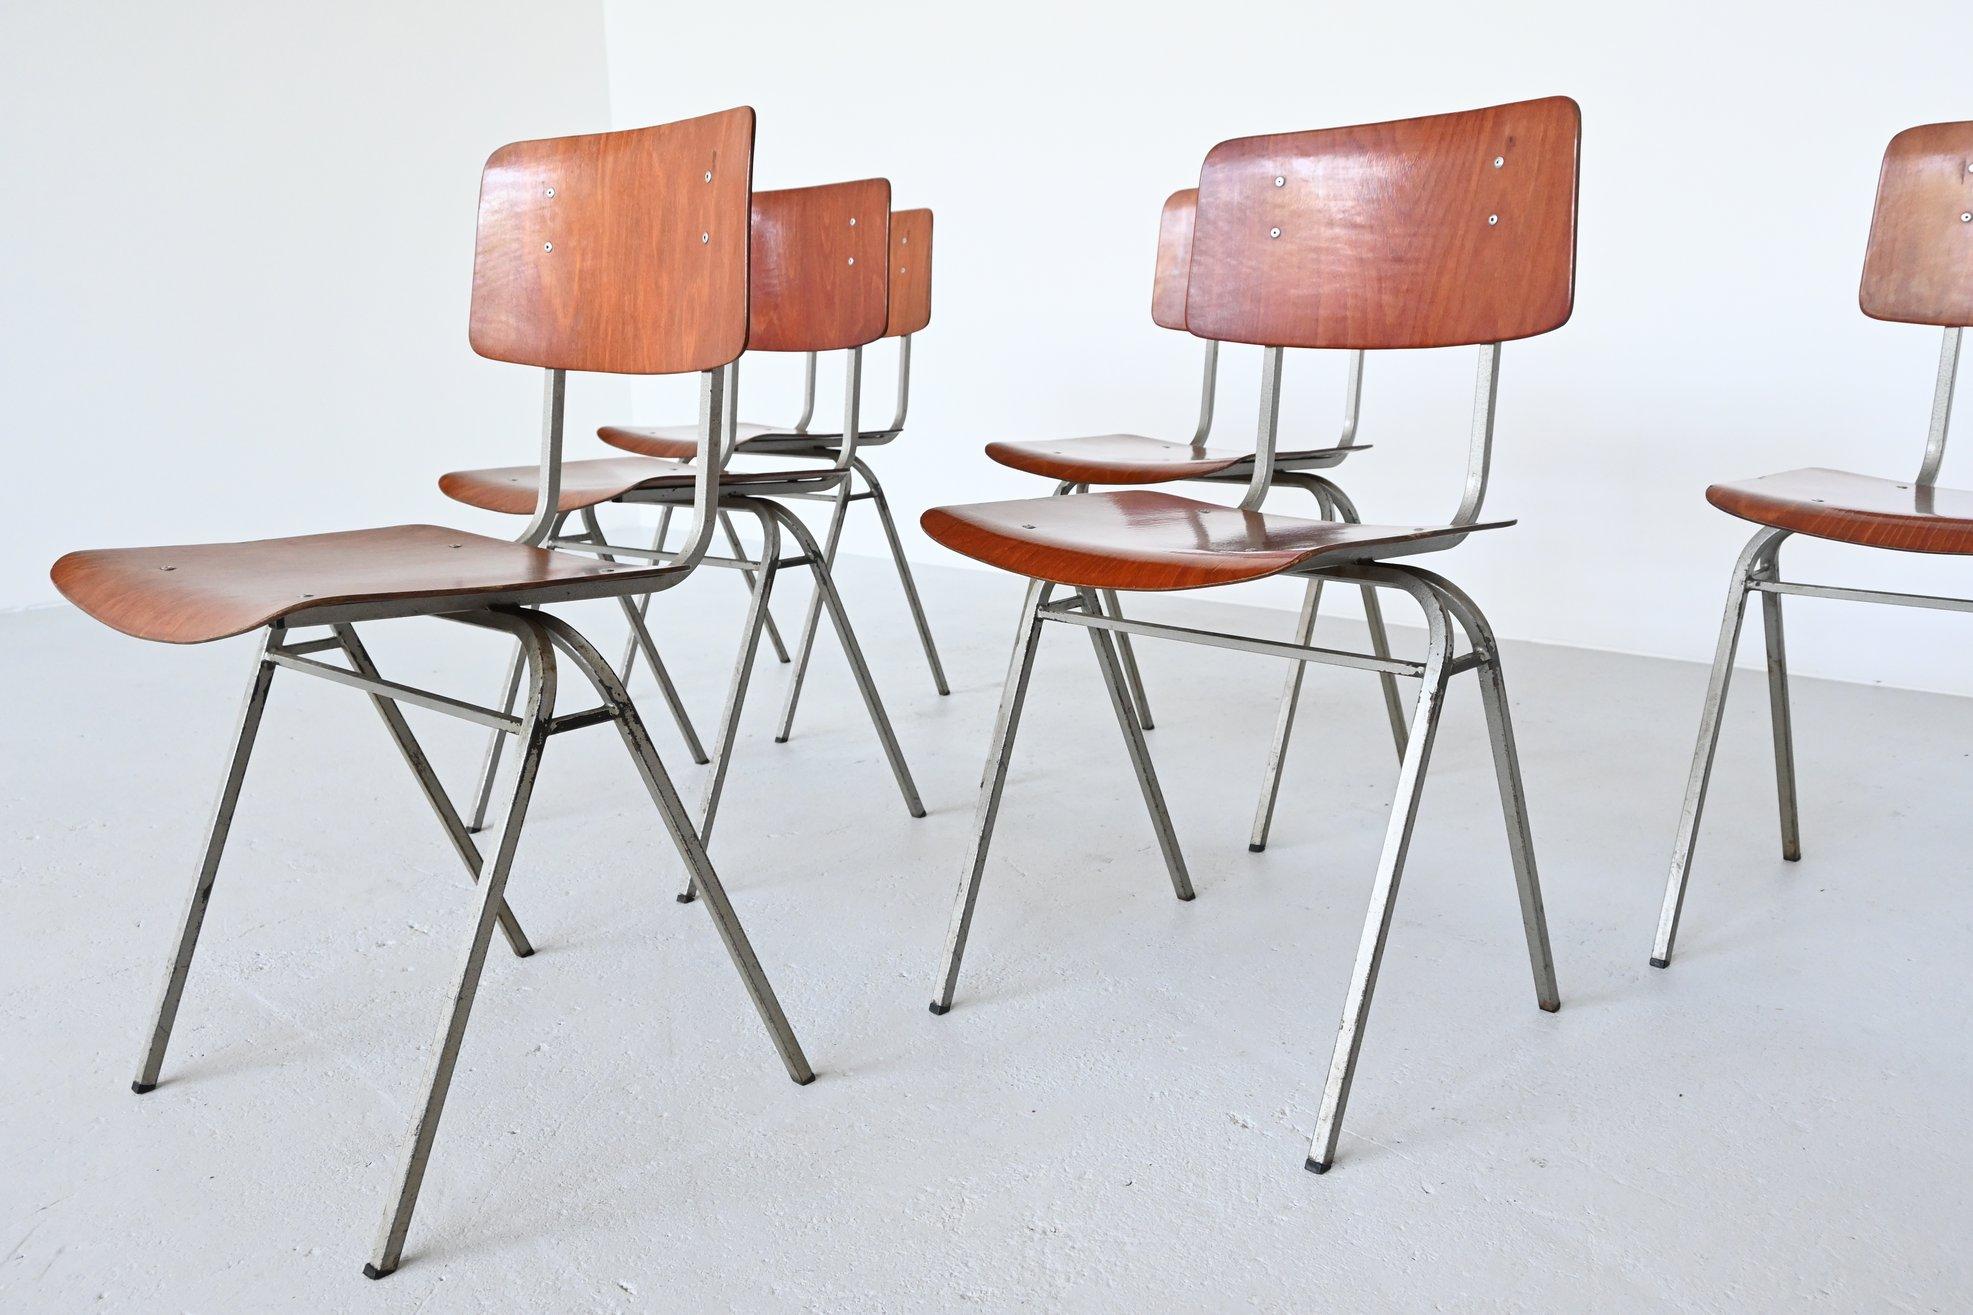 Lacquered Dutch Industrial Stacking Chairs, the Netherlands, 1960